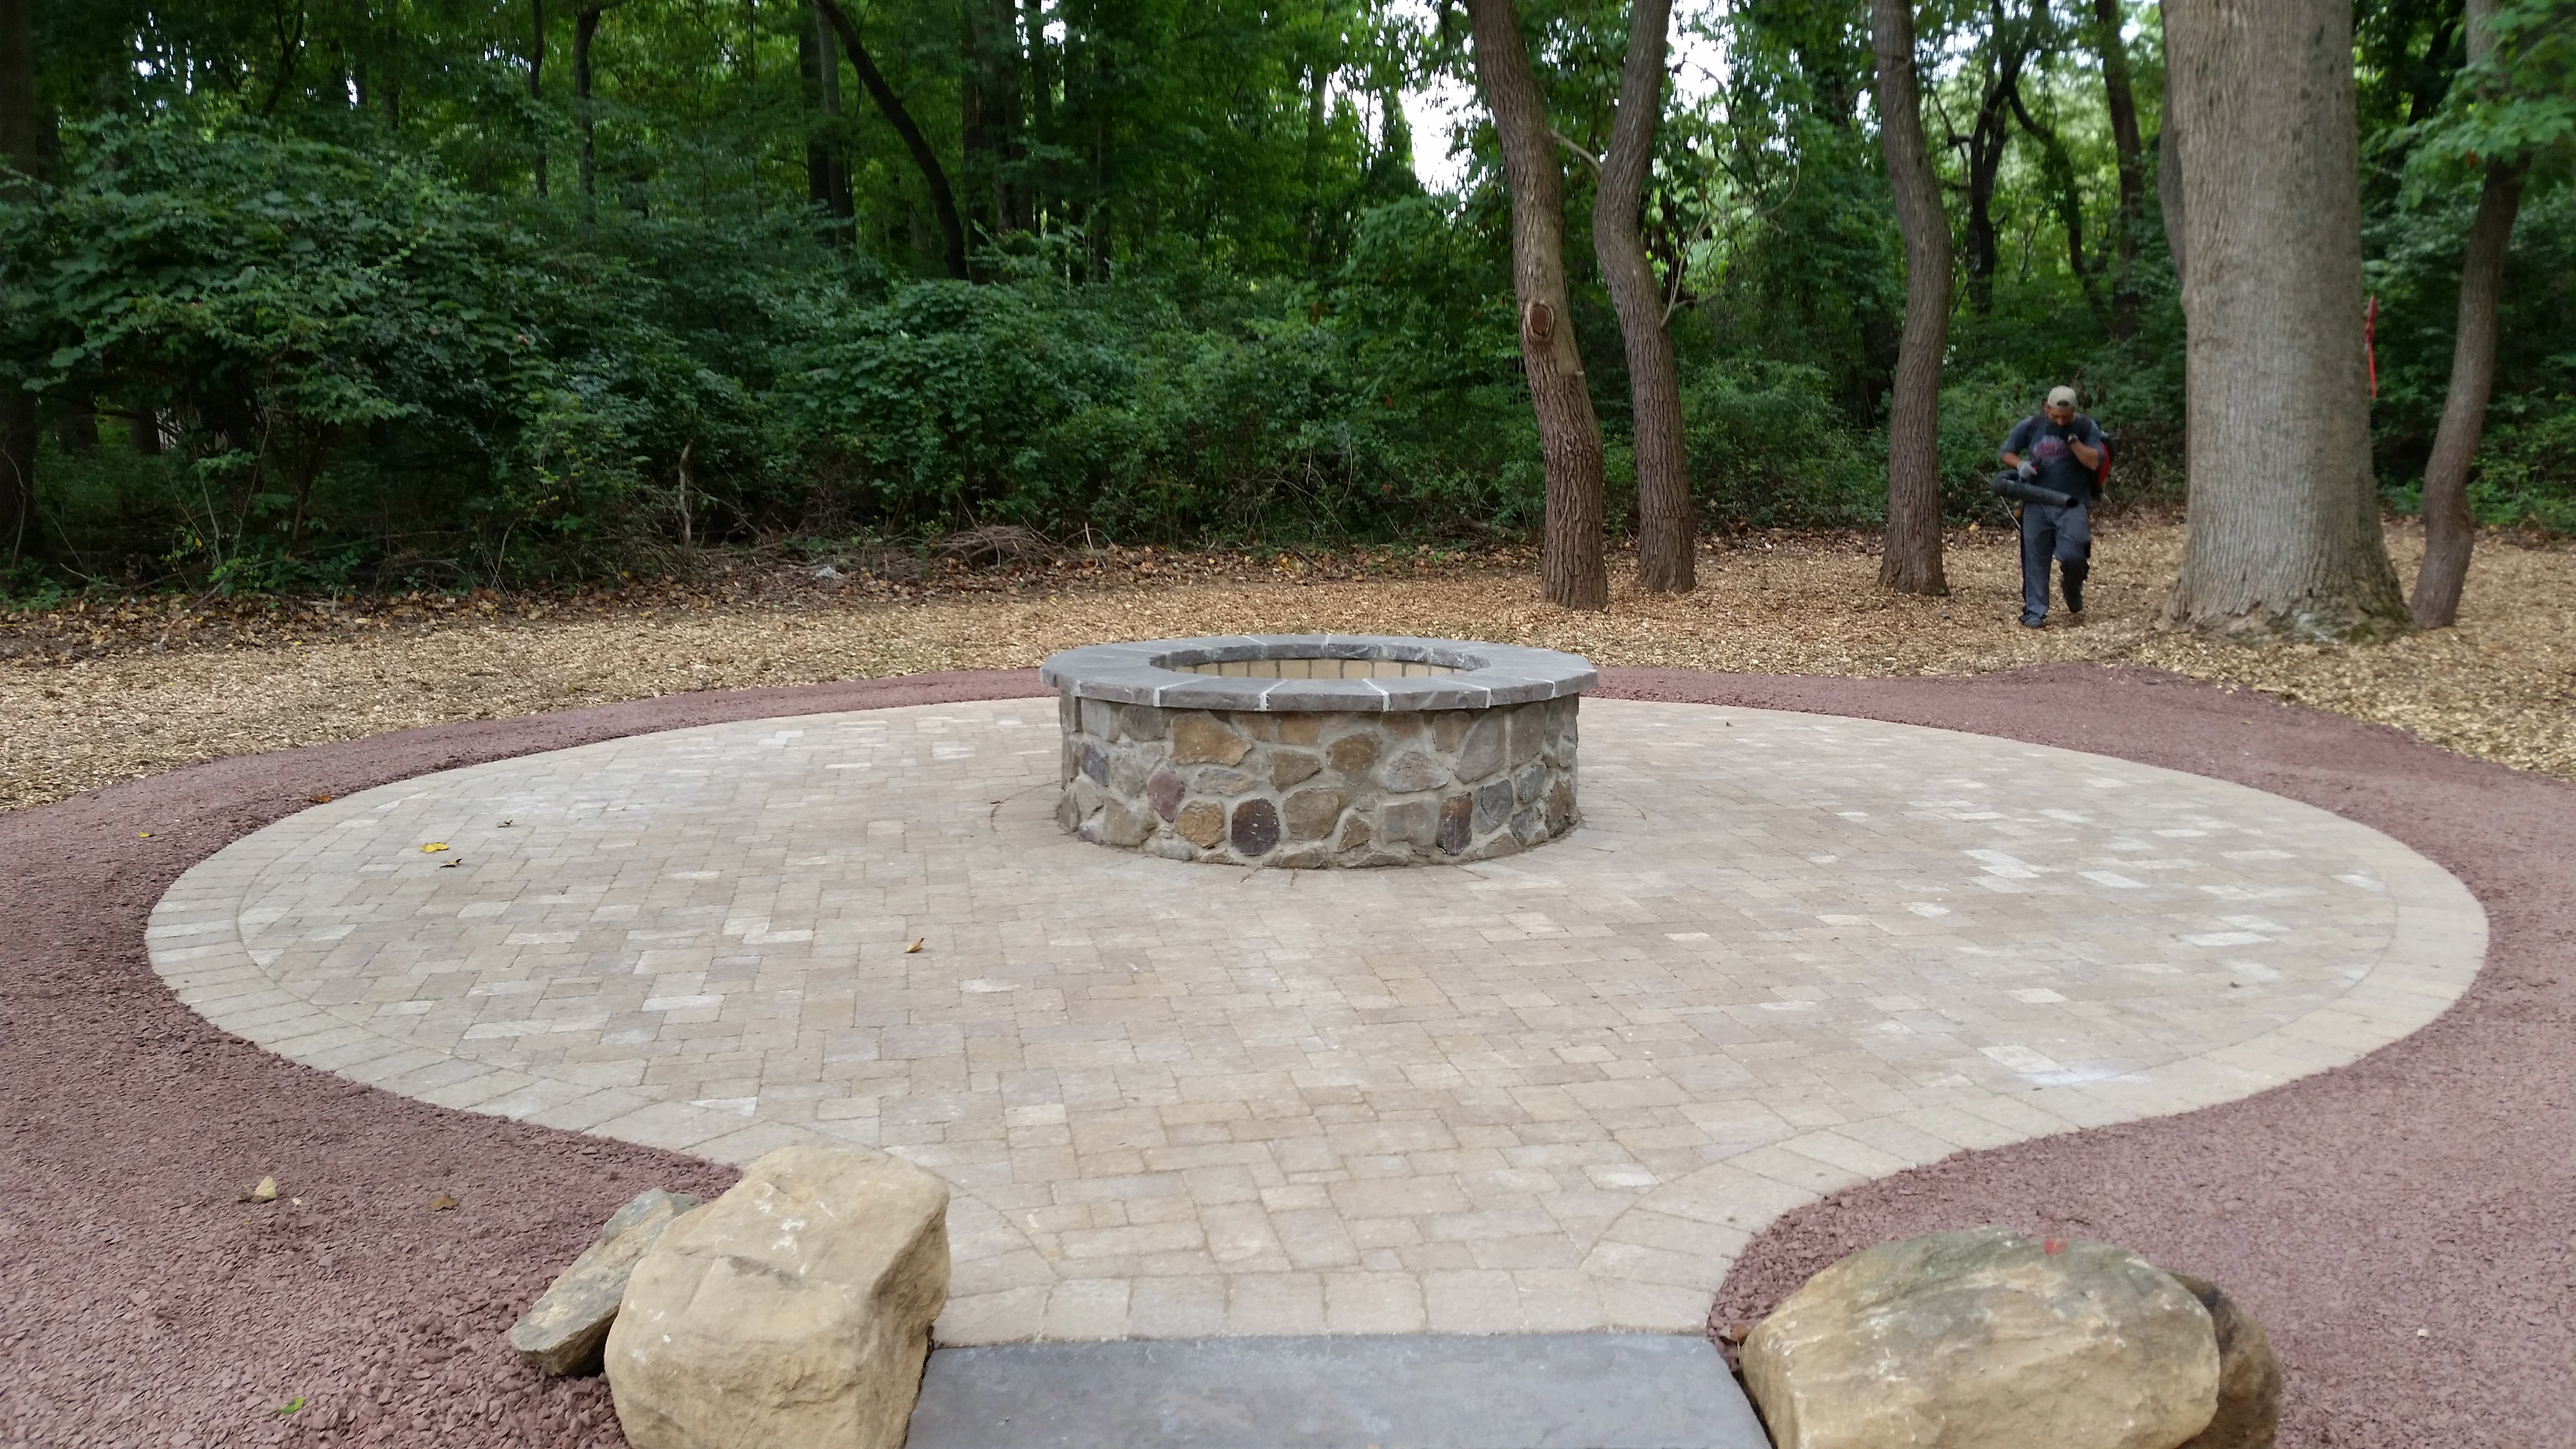 Fire Pit & Patio in Glen Mills, Garnet Valley, Media, & West Chester PA - ScapeWorx